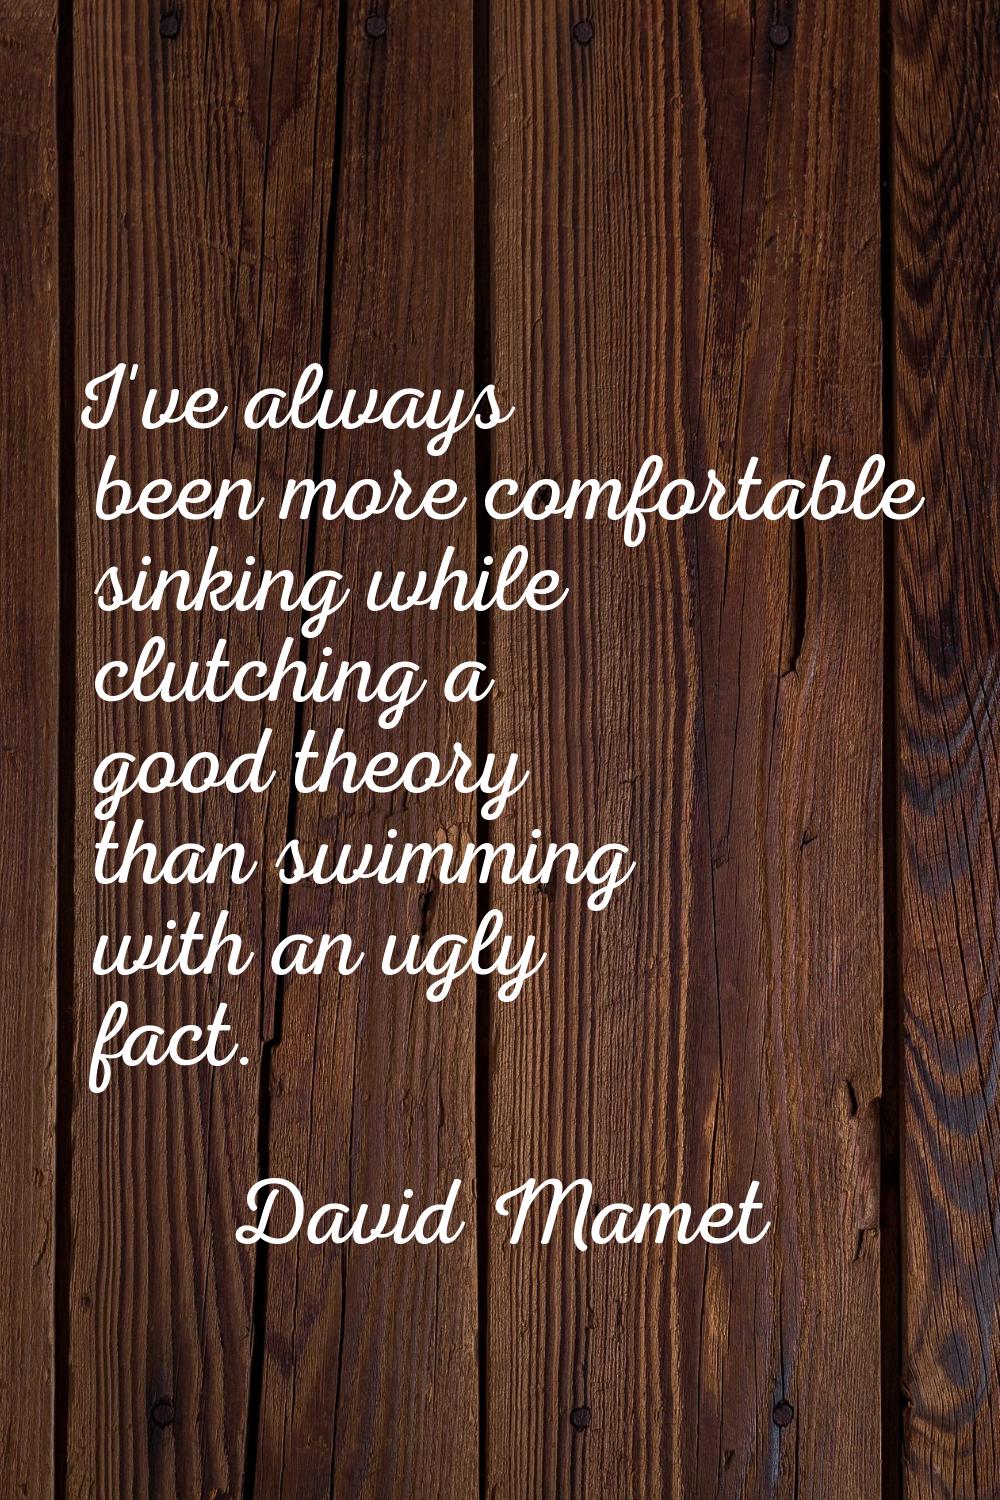 I've always been more comfortable sinking while clutching a good theory than swimming with an ugly 